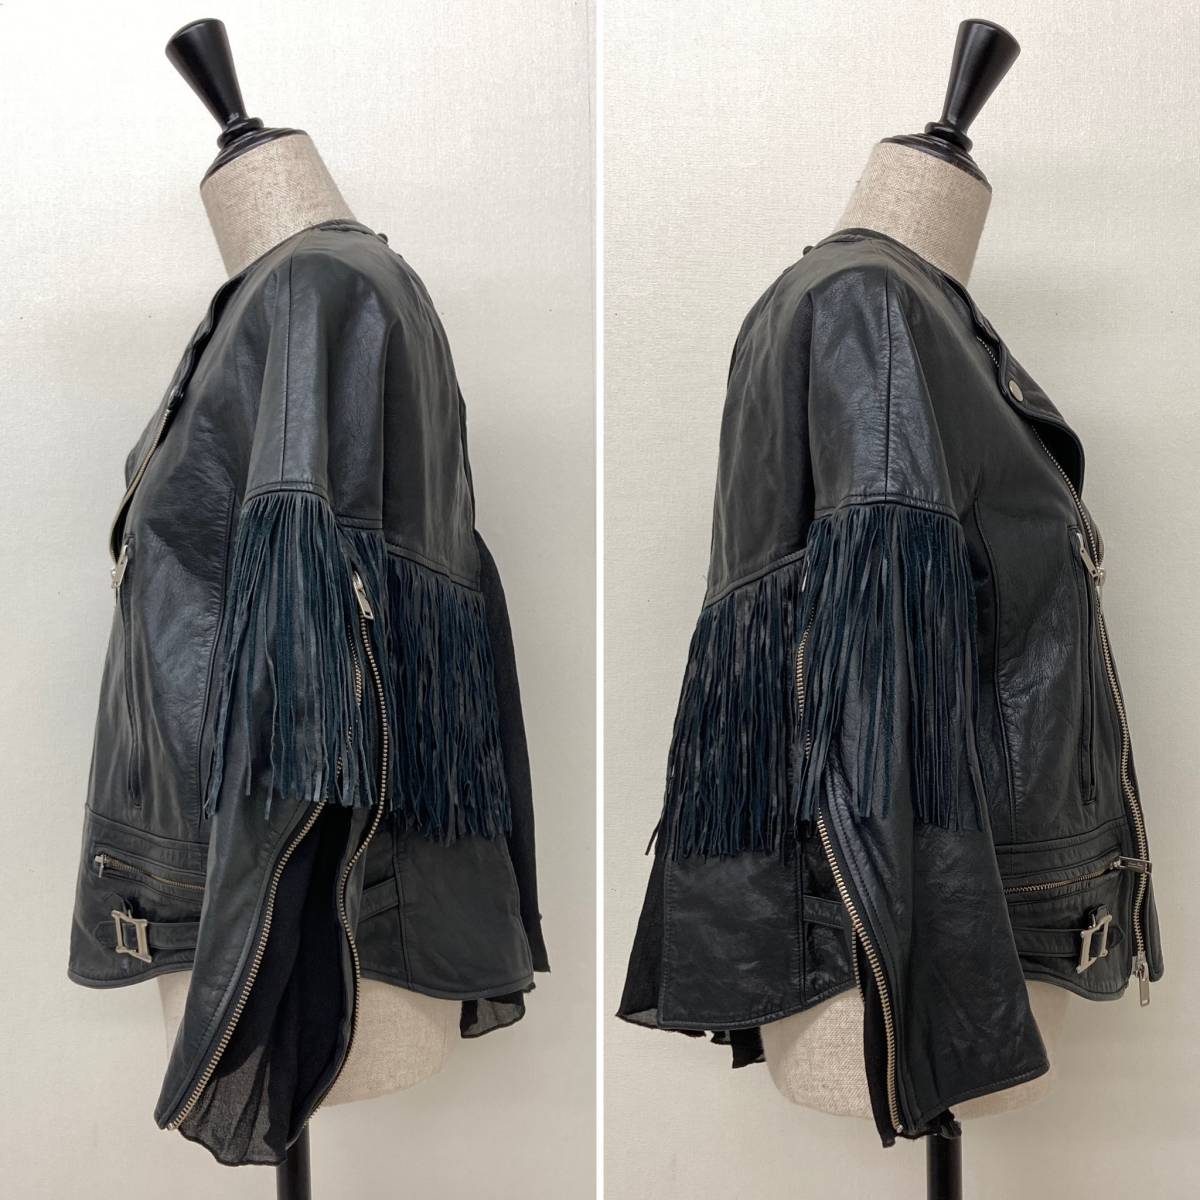 UNDERCOVER 2013SS fringe silk switch Rider's leather jacket black 1 size undercover blouson archive 3070626